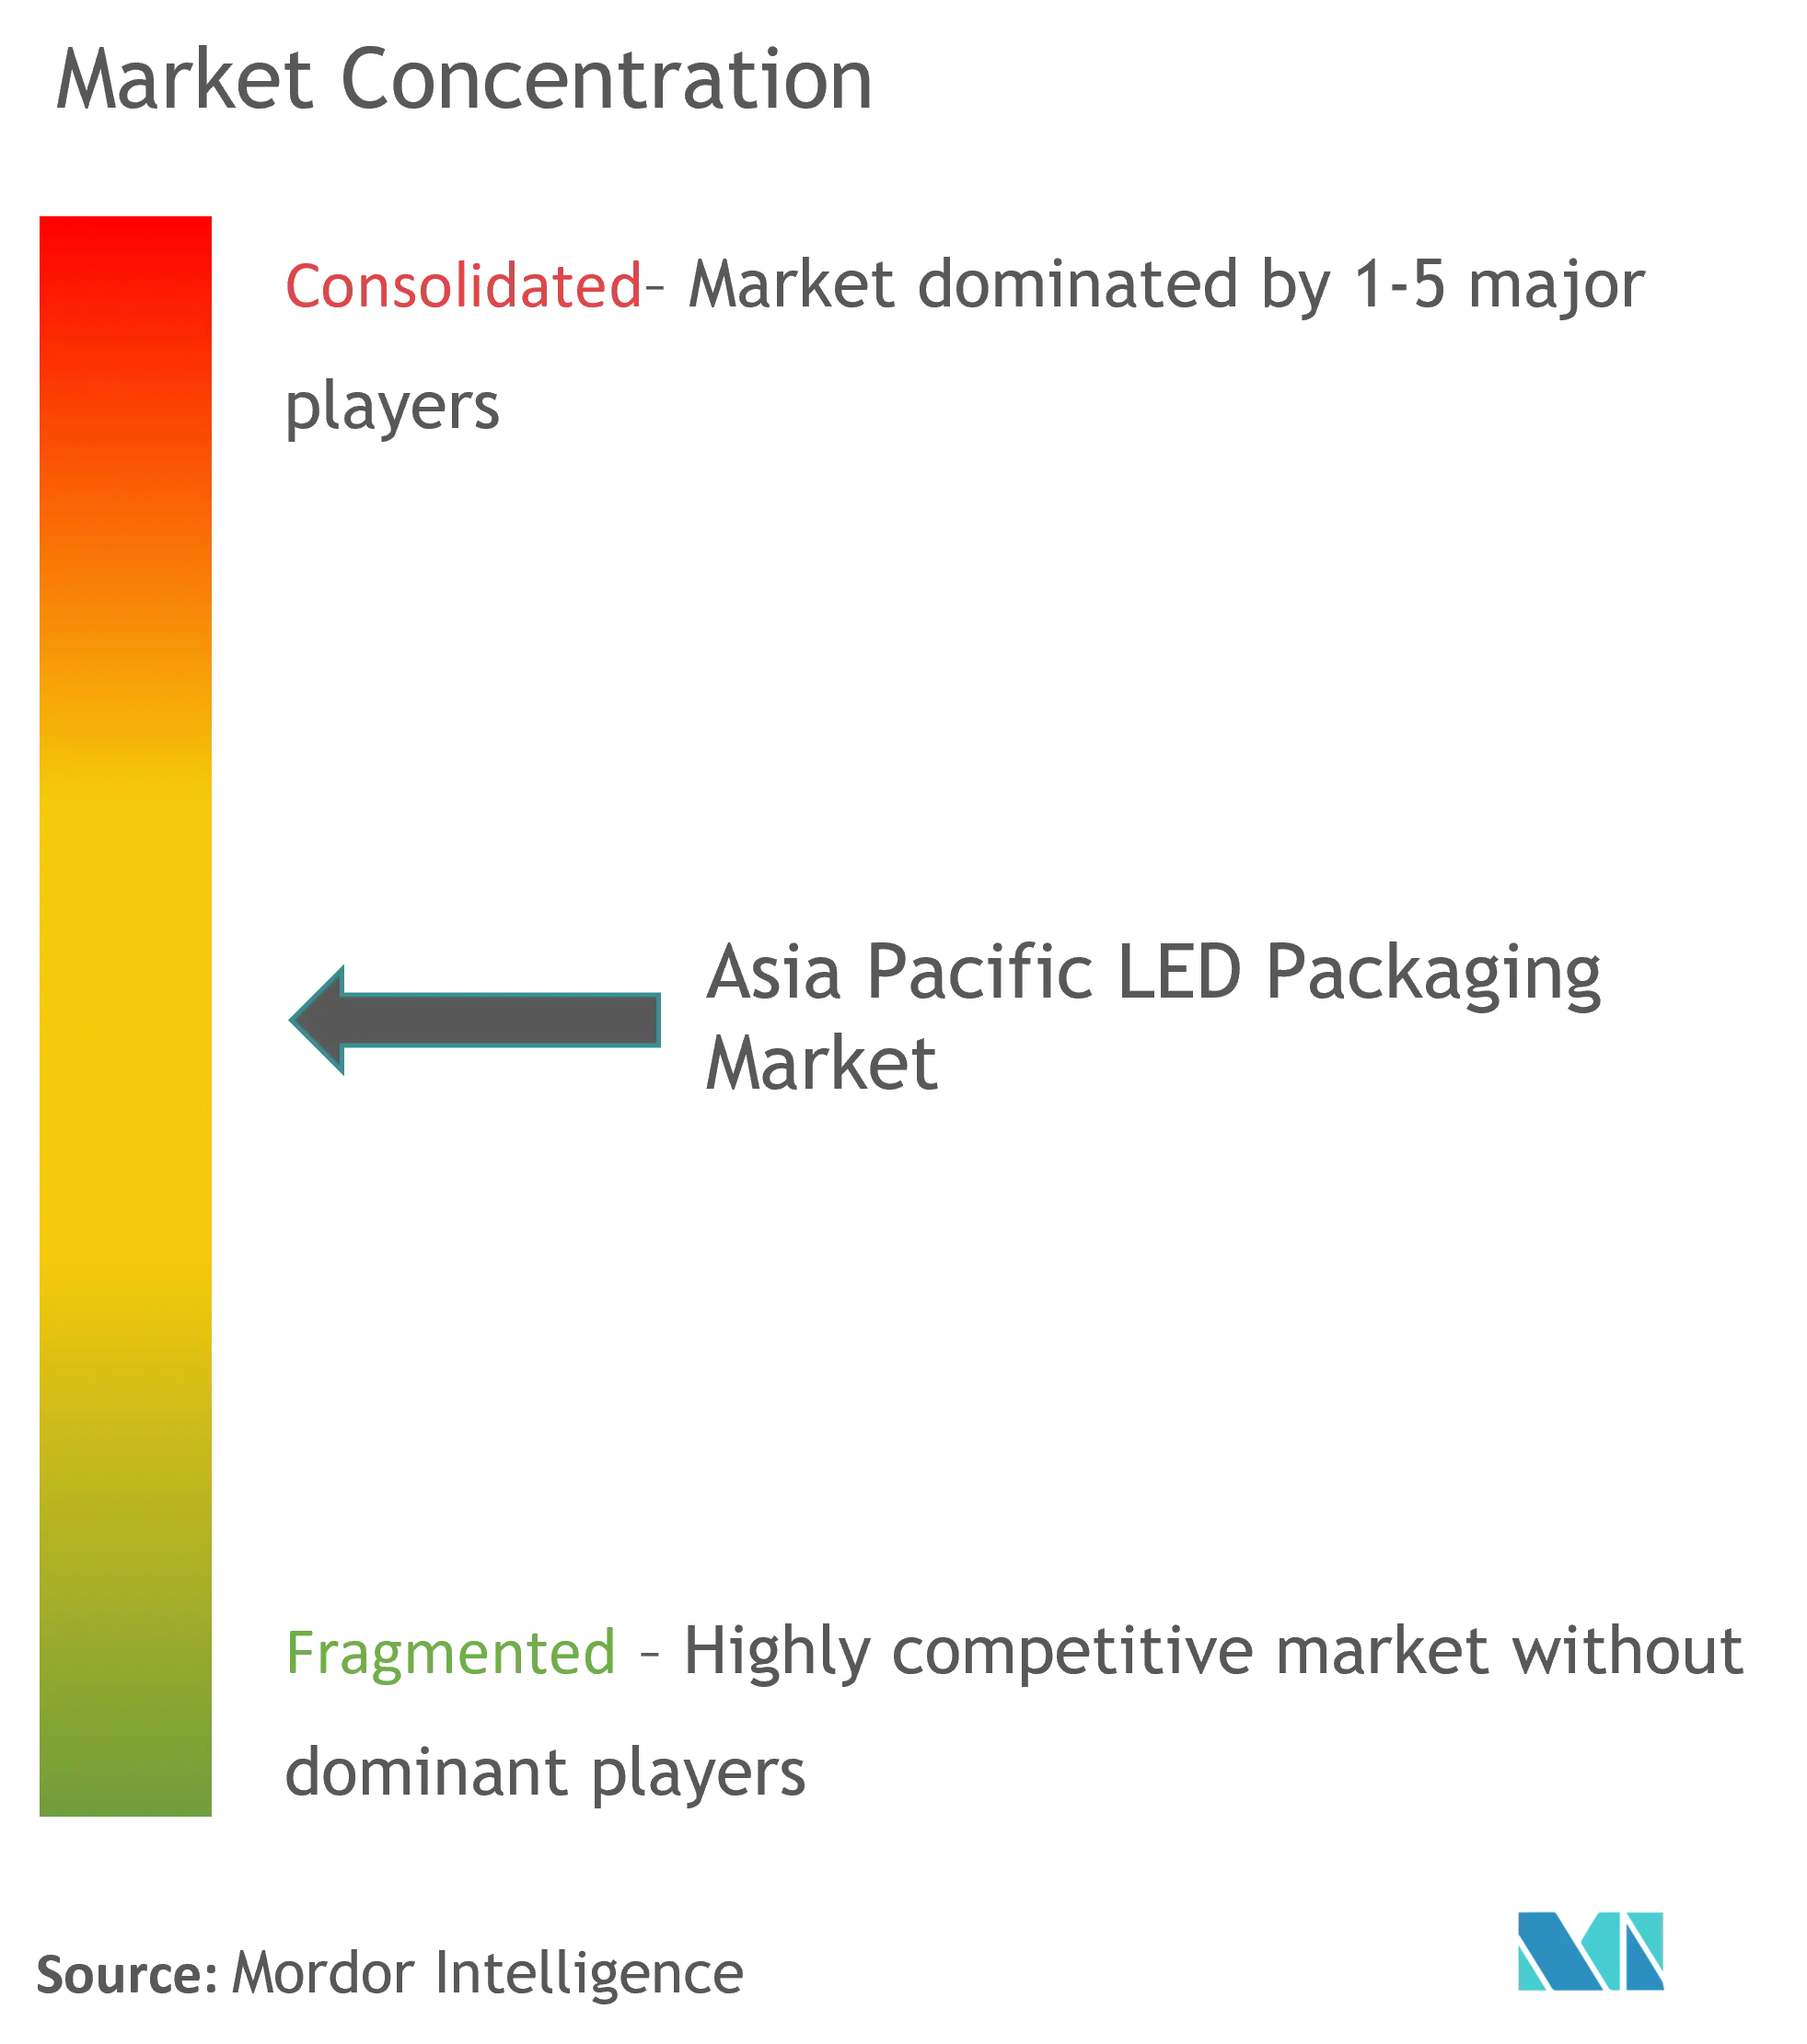 Asia Pacific LED Packaging Market 